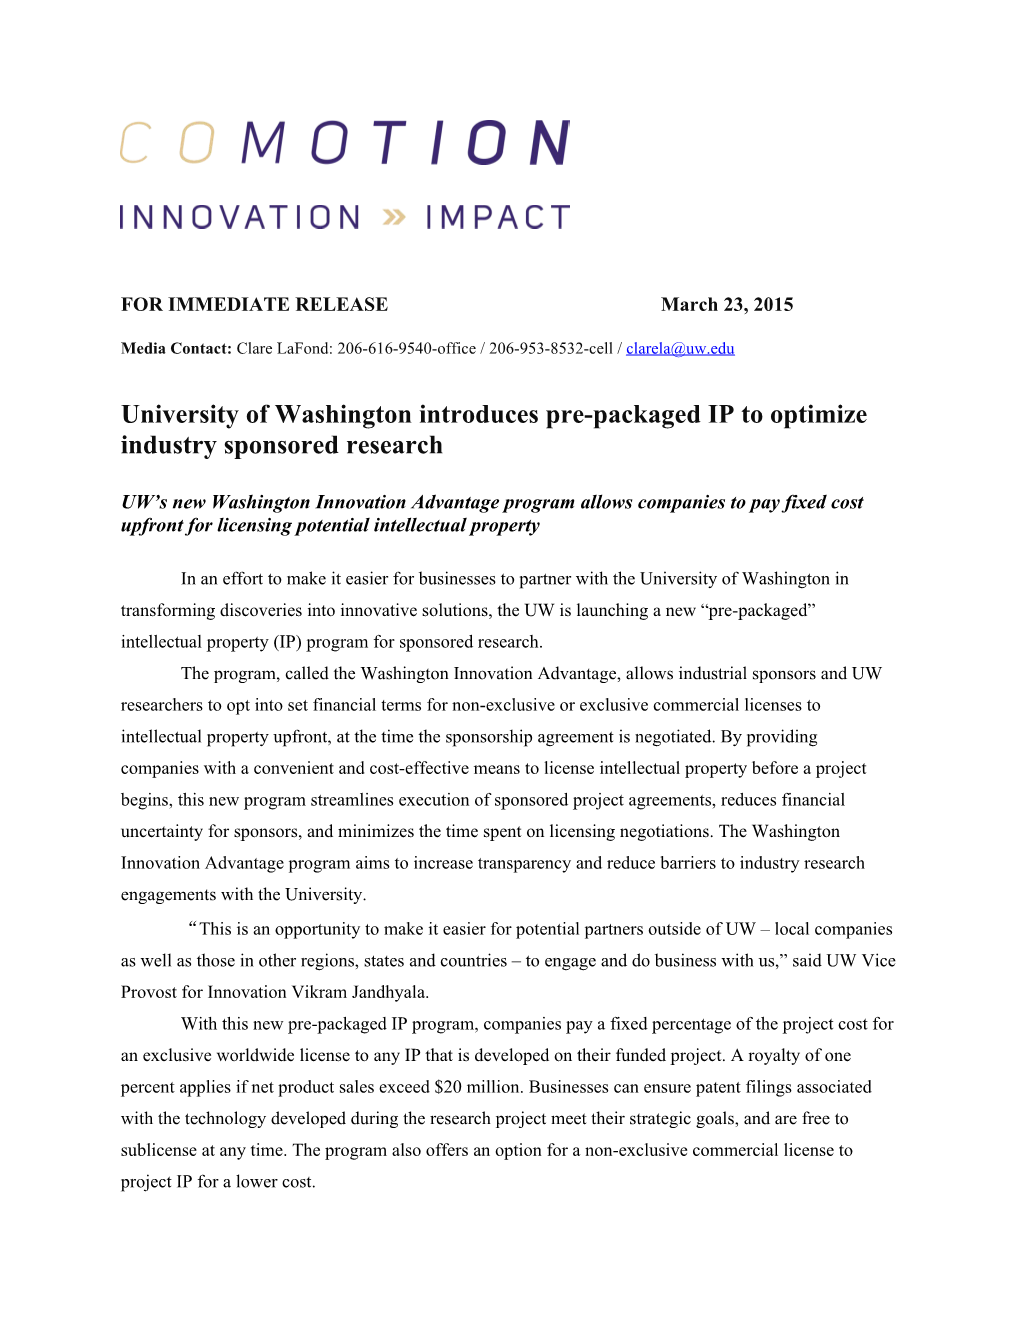 University of Washington Introduces Pre-Packaged IP to Optimize Industry Sponsored Research